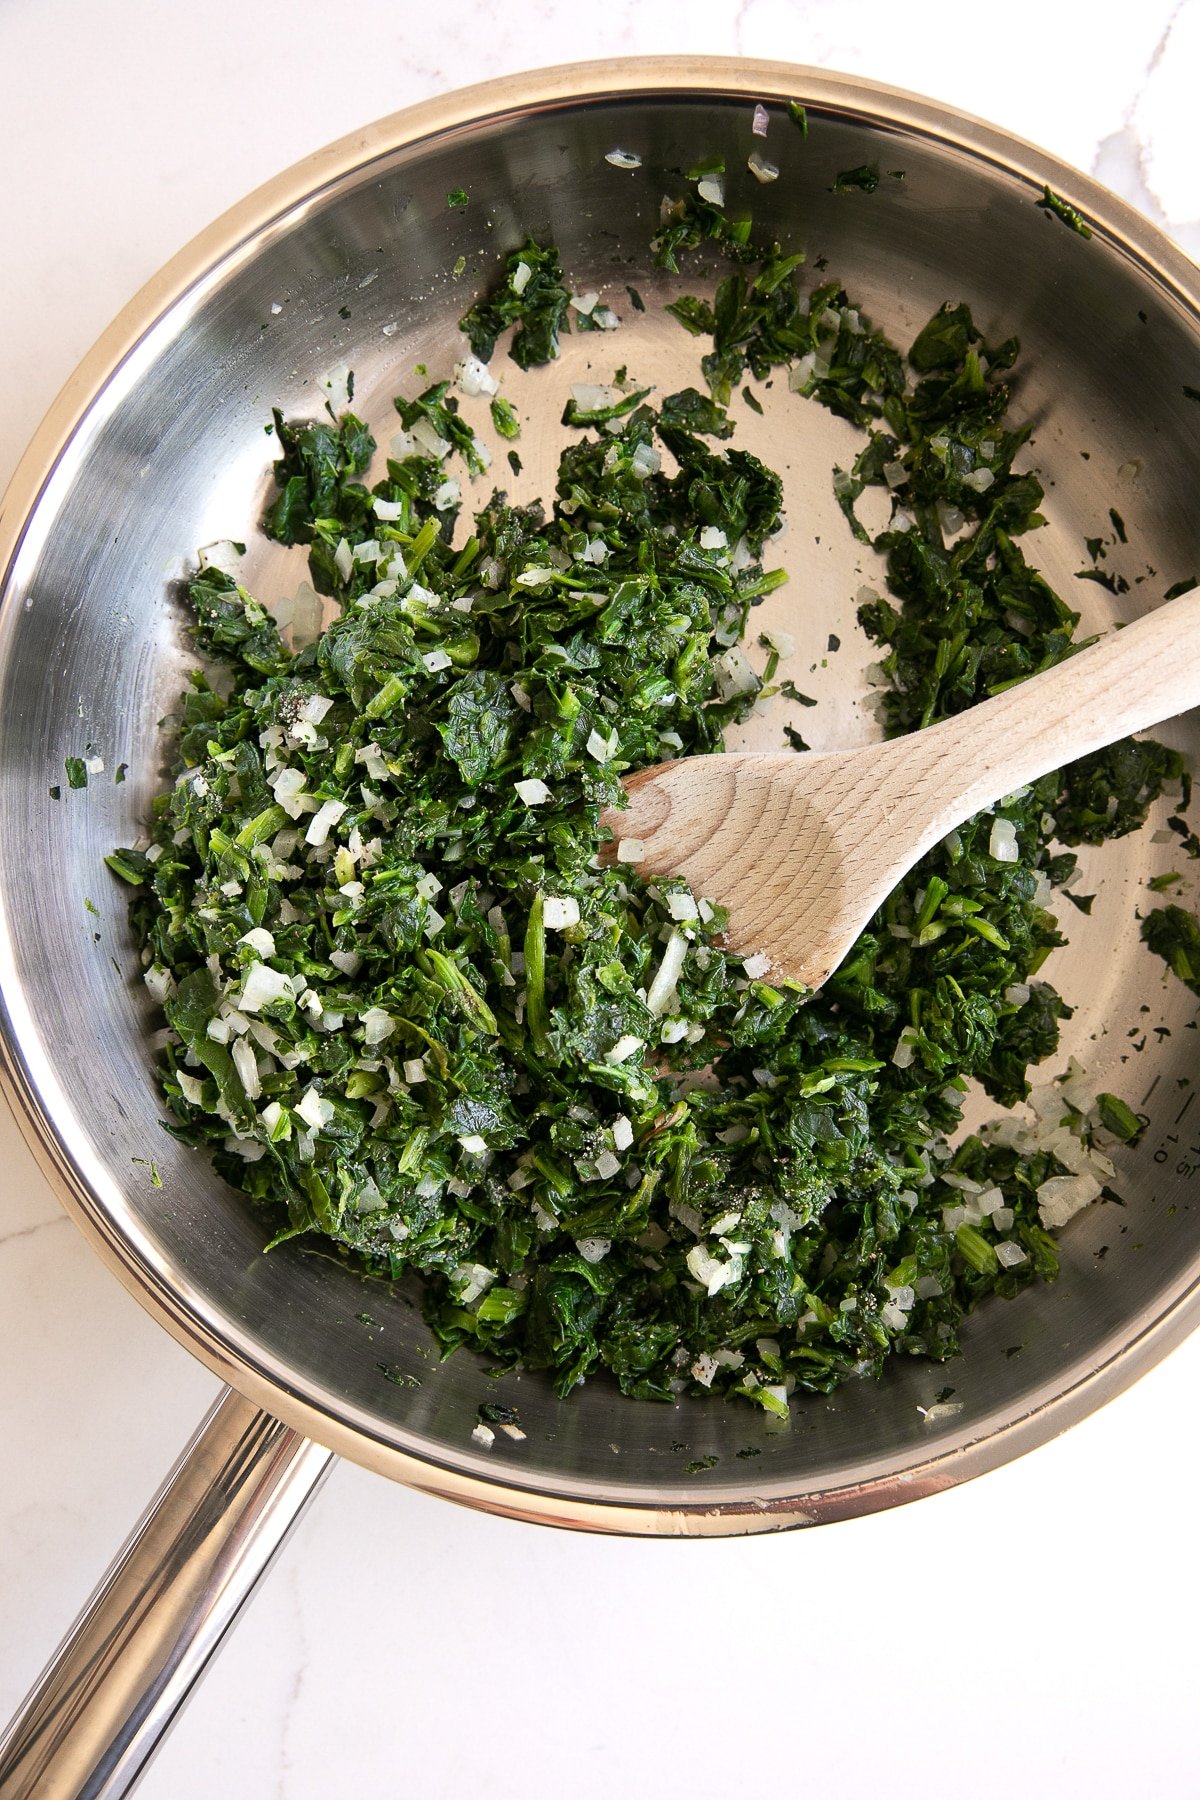 Skillet filled with sauteed chopped shallots and spinach.